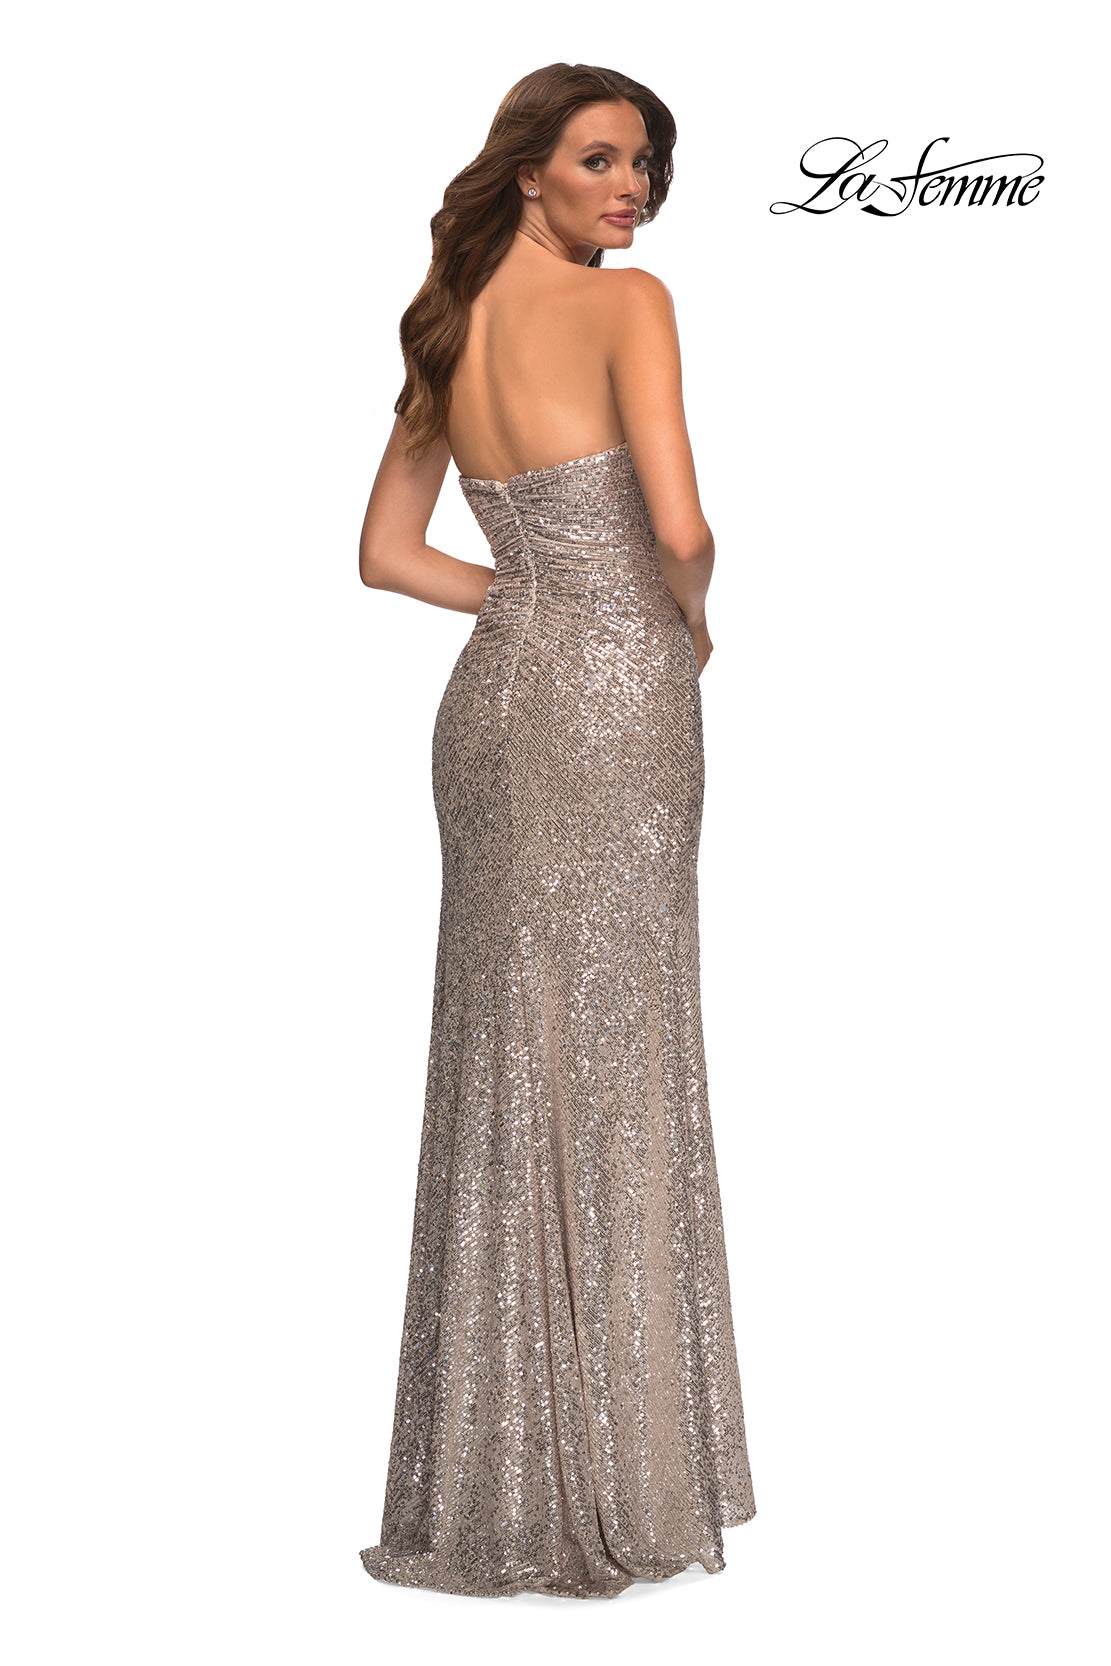  La Femme Long Strapless Prom Dress with Sequins